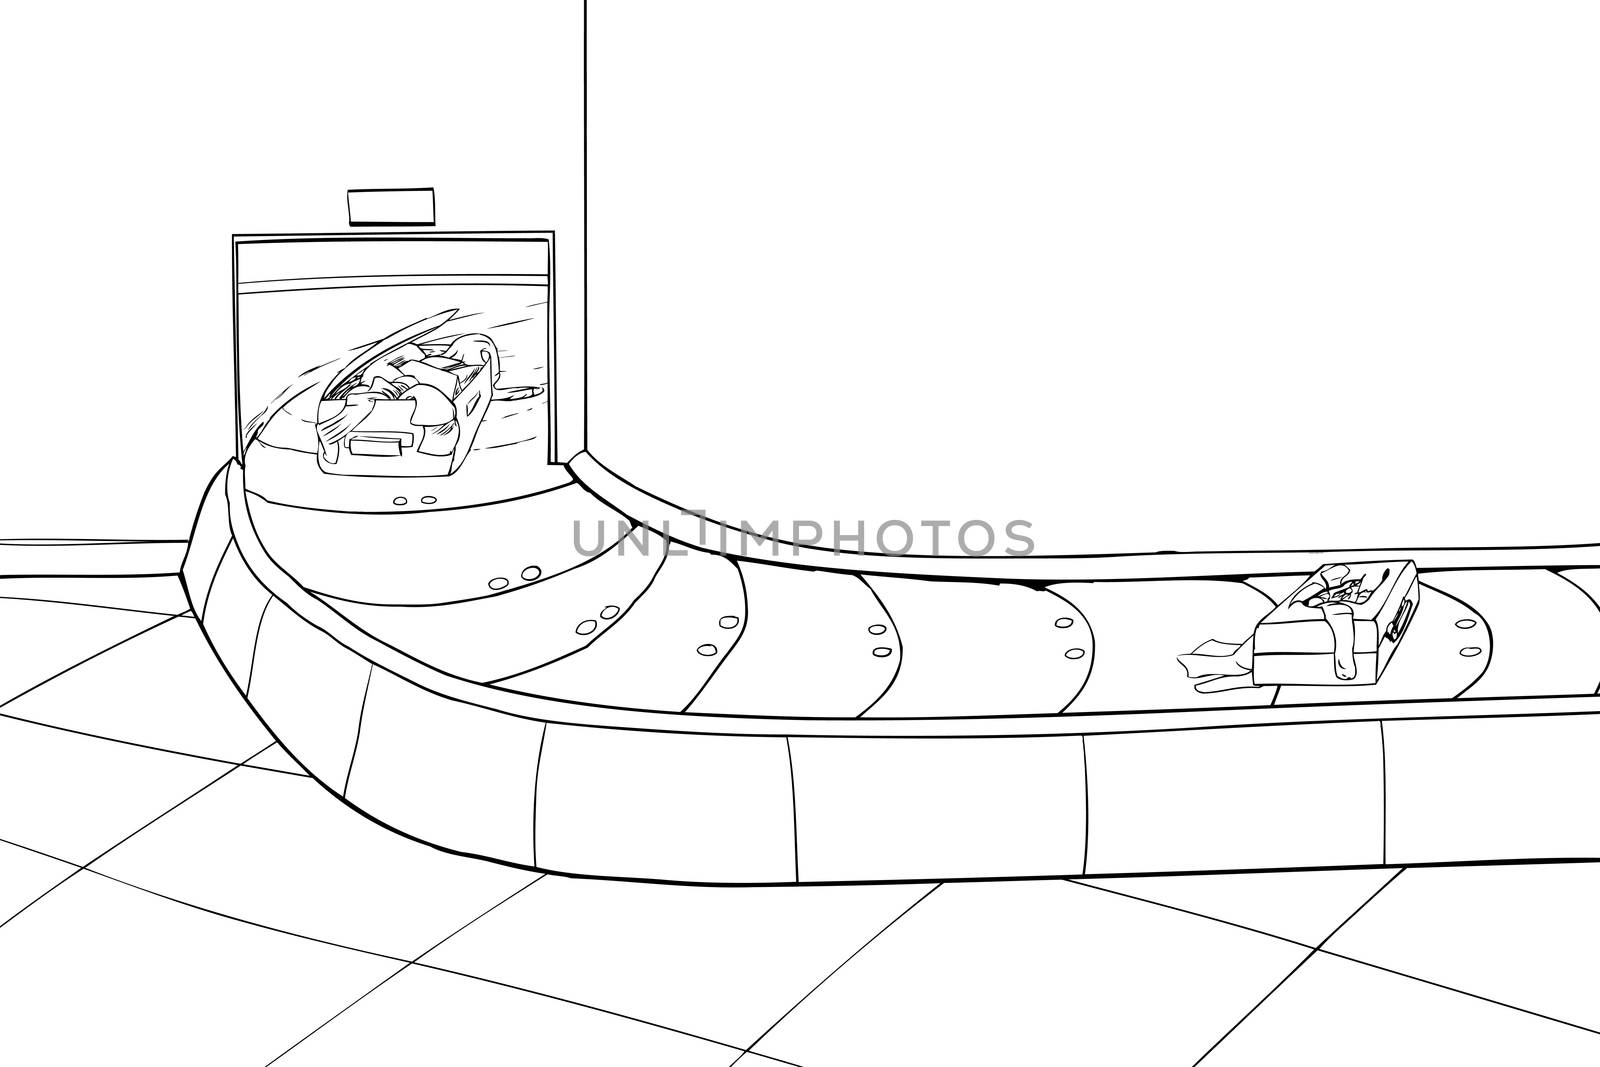 Outline illustration of two damaged suitcases in baggage claim scene